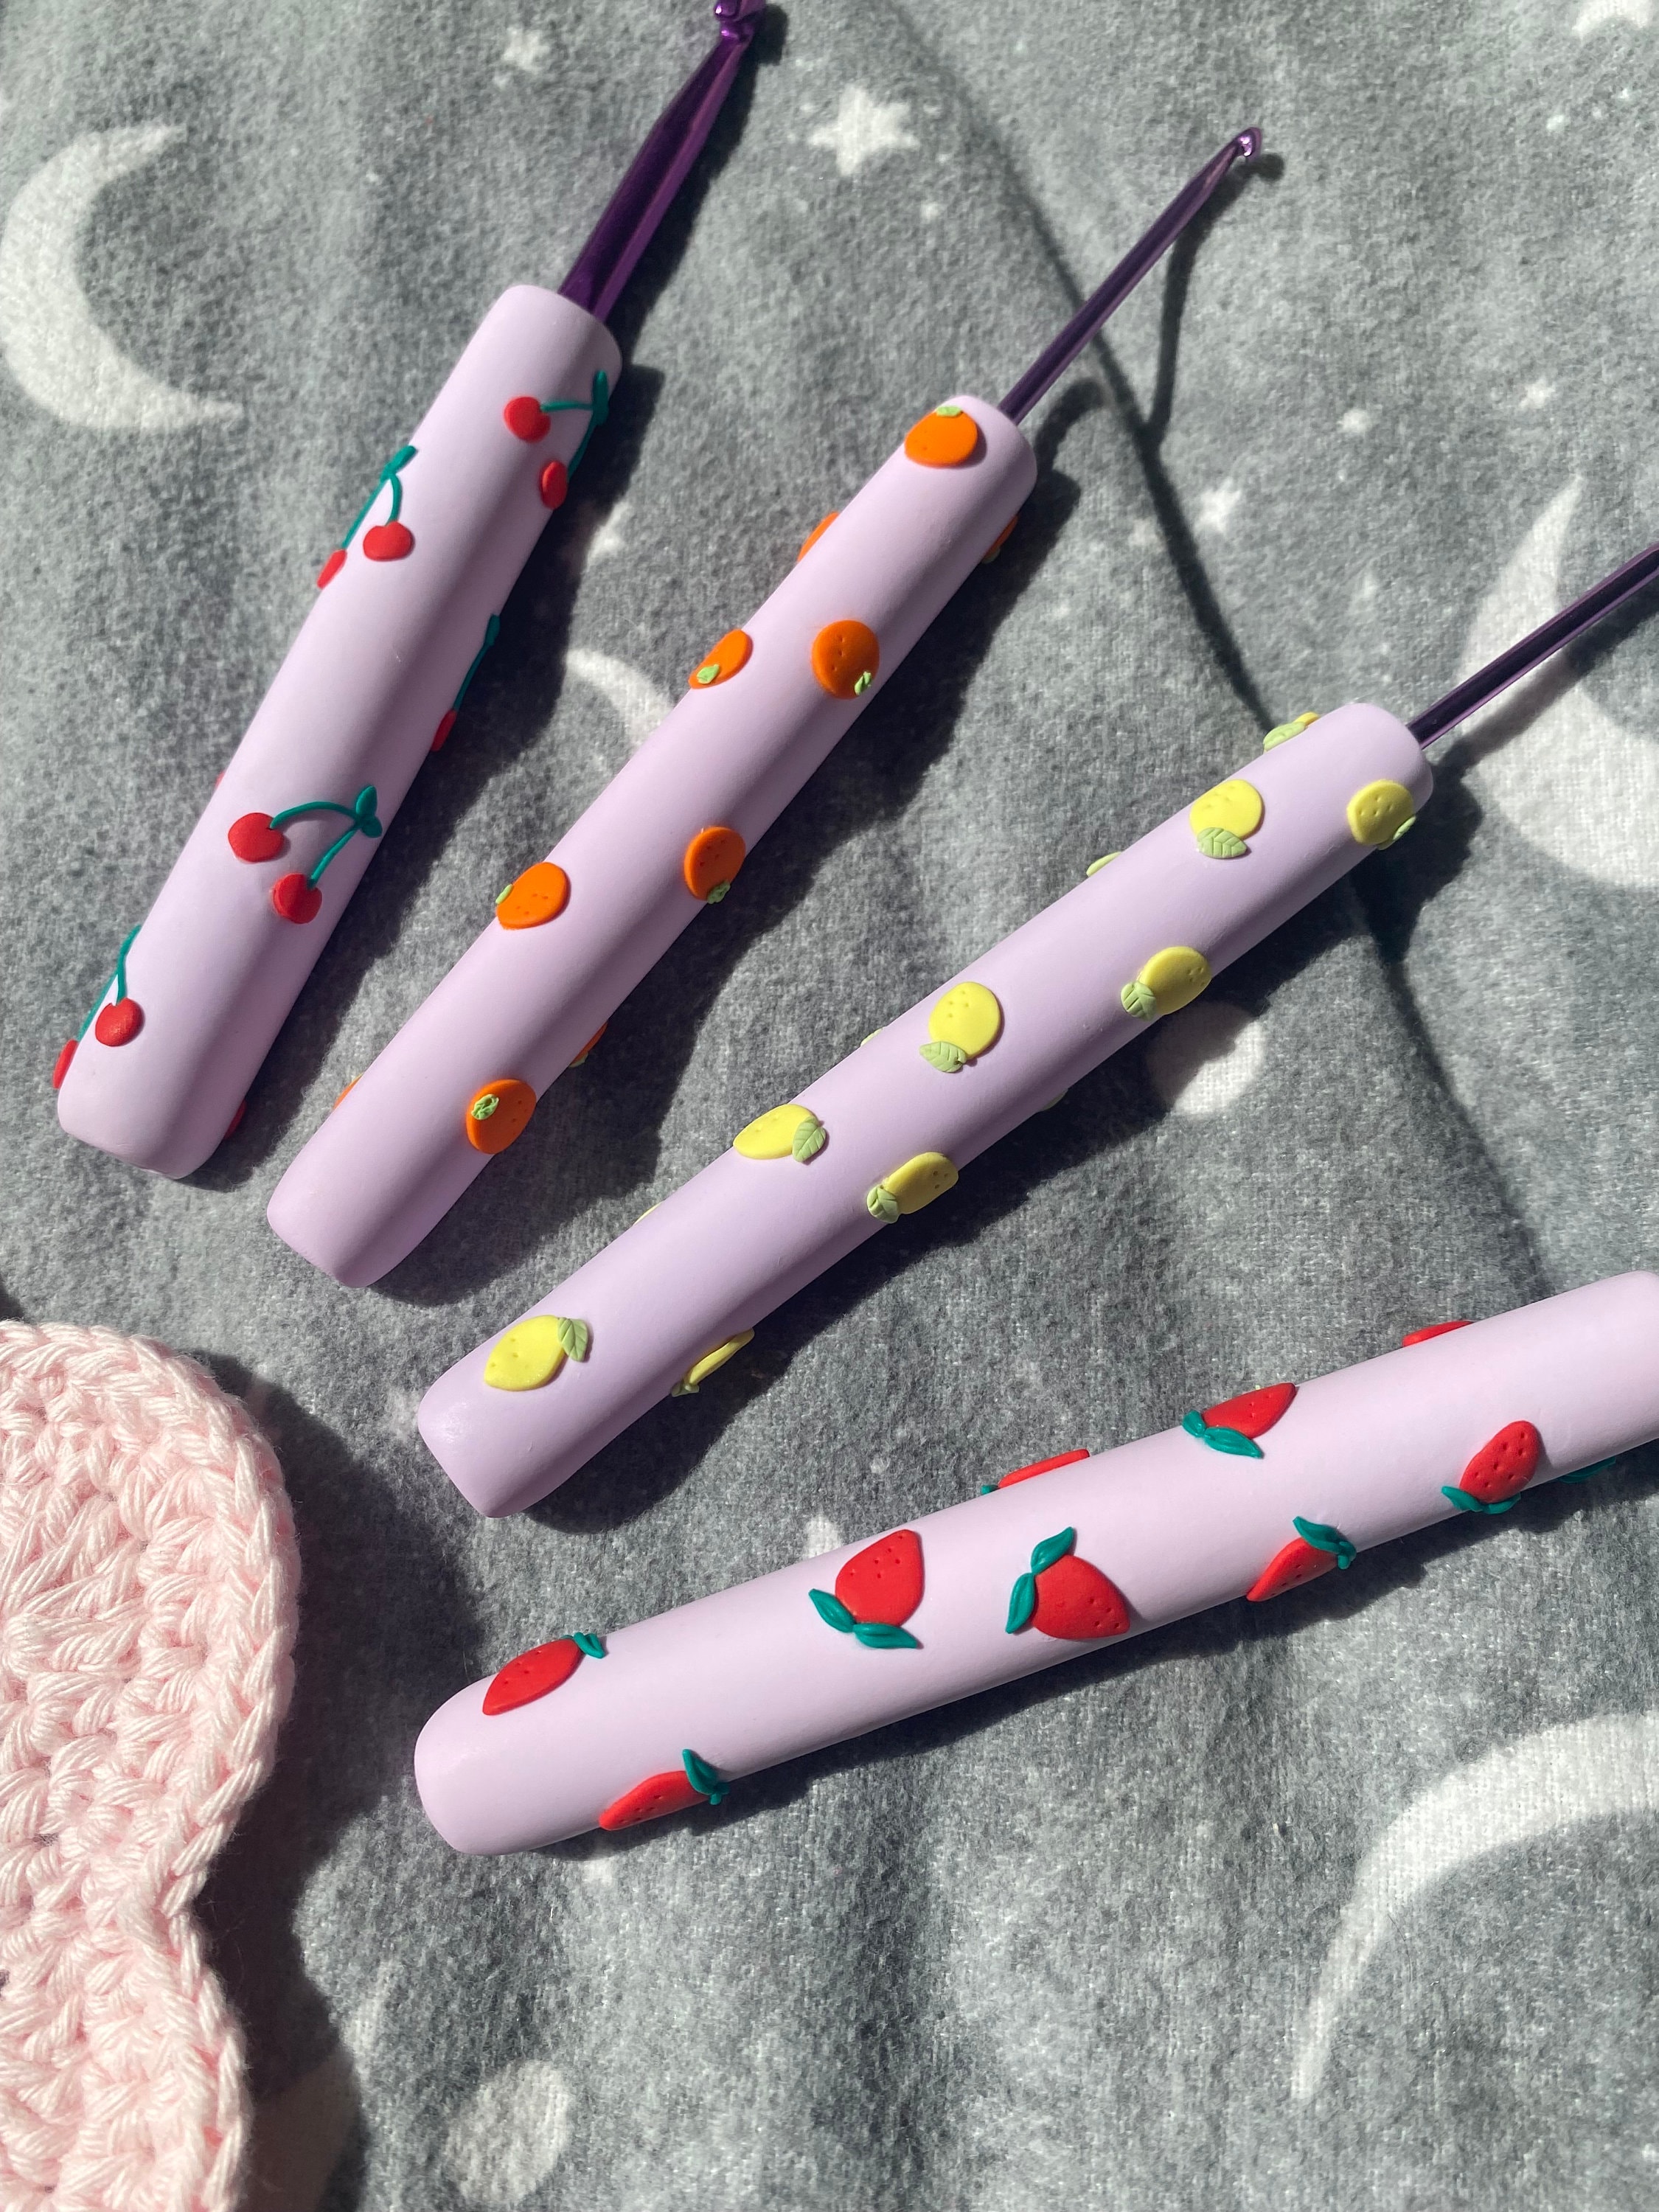 4mm Crochet Hook with Polymer Clay Handle [US Size G Hook]